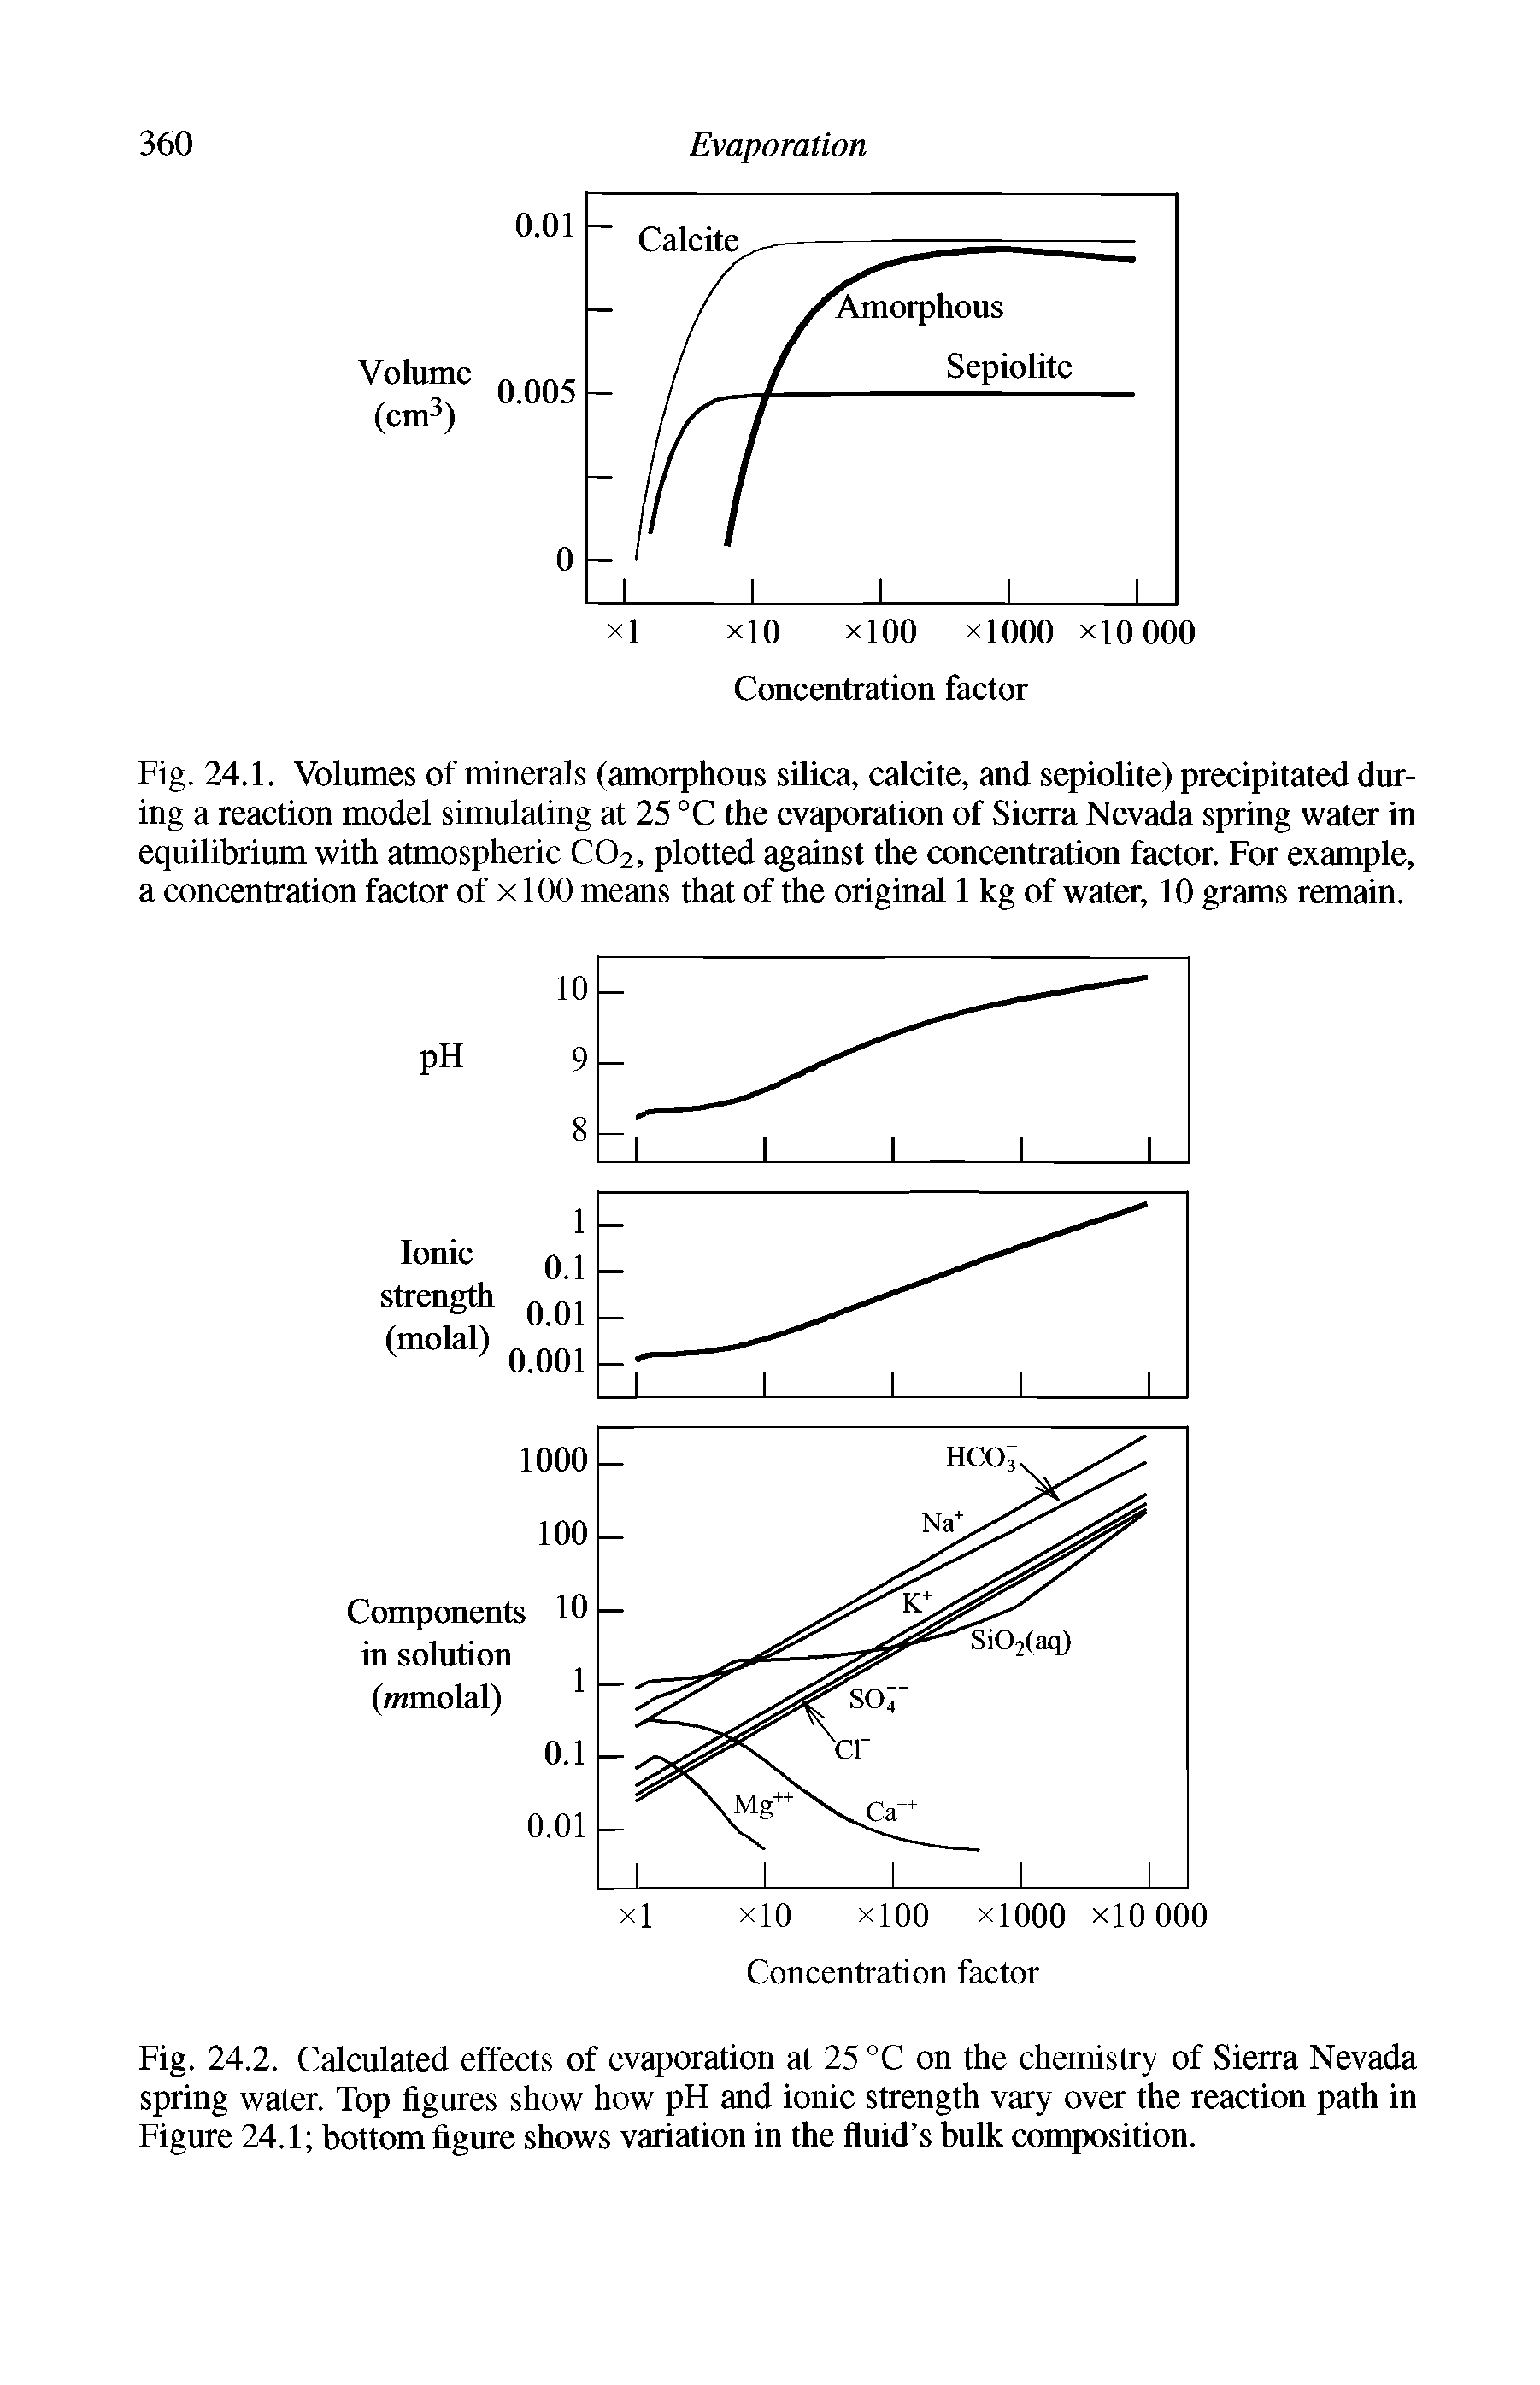 Fig. 24.1. Volumes of minerals (amorphous silica, calcite, and sepiolite) precipitated during a reaction model simulating at 25 °C the evaporation of Sierra Nevada spring water in equilibrium with atmospheric C02, plotted against the concentration factor. For example, a concentration factor of x 100 means that of the original 1 kg of water, 10 grams remain.